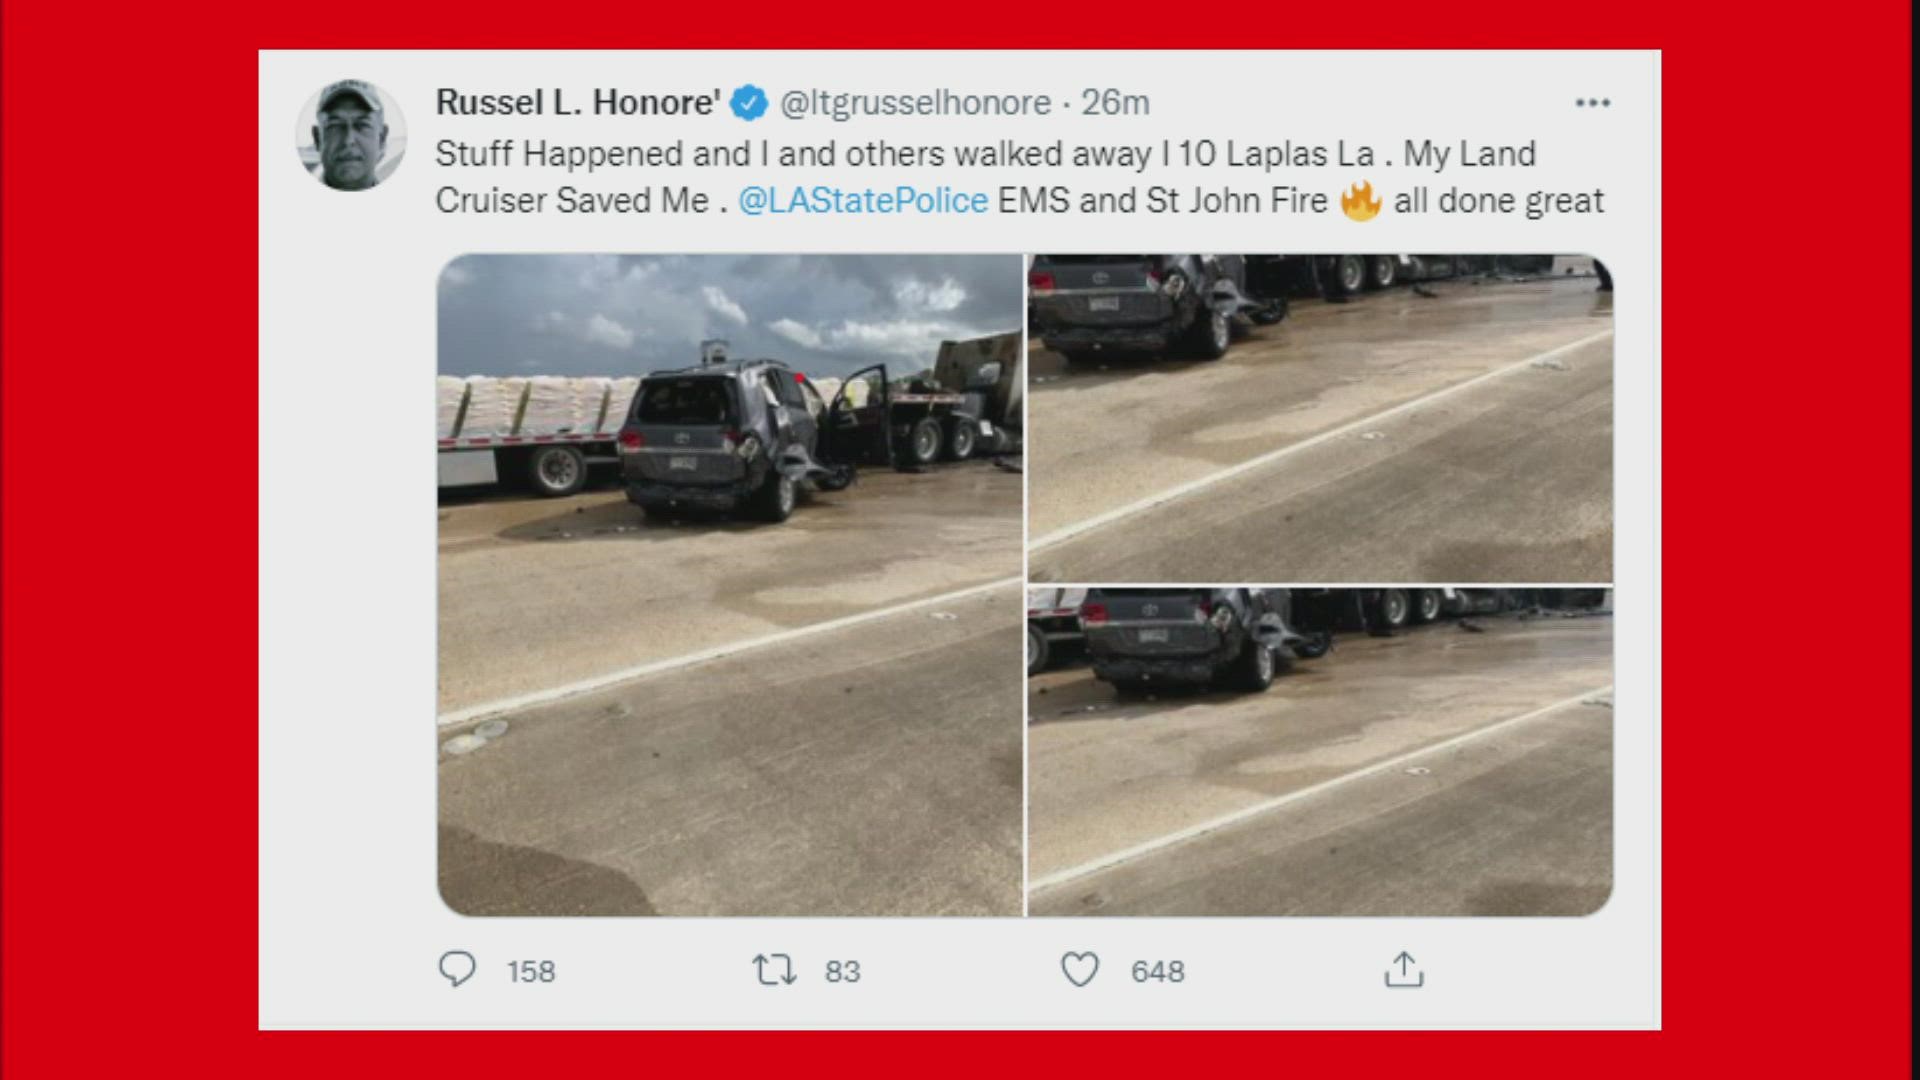 Honoré tweeted after the crash saying that he and others were able to walk away.